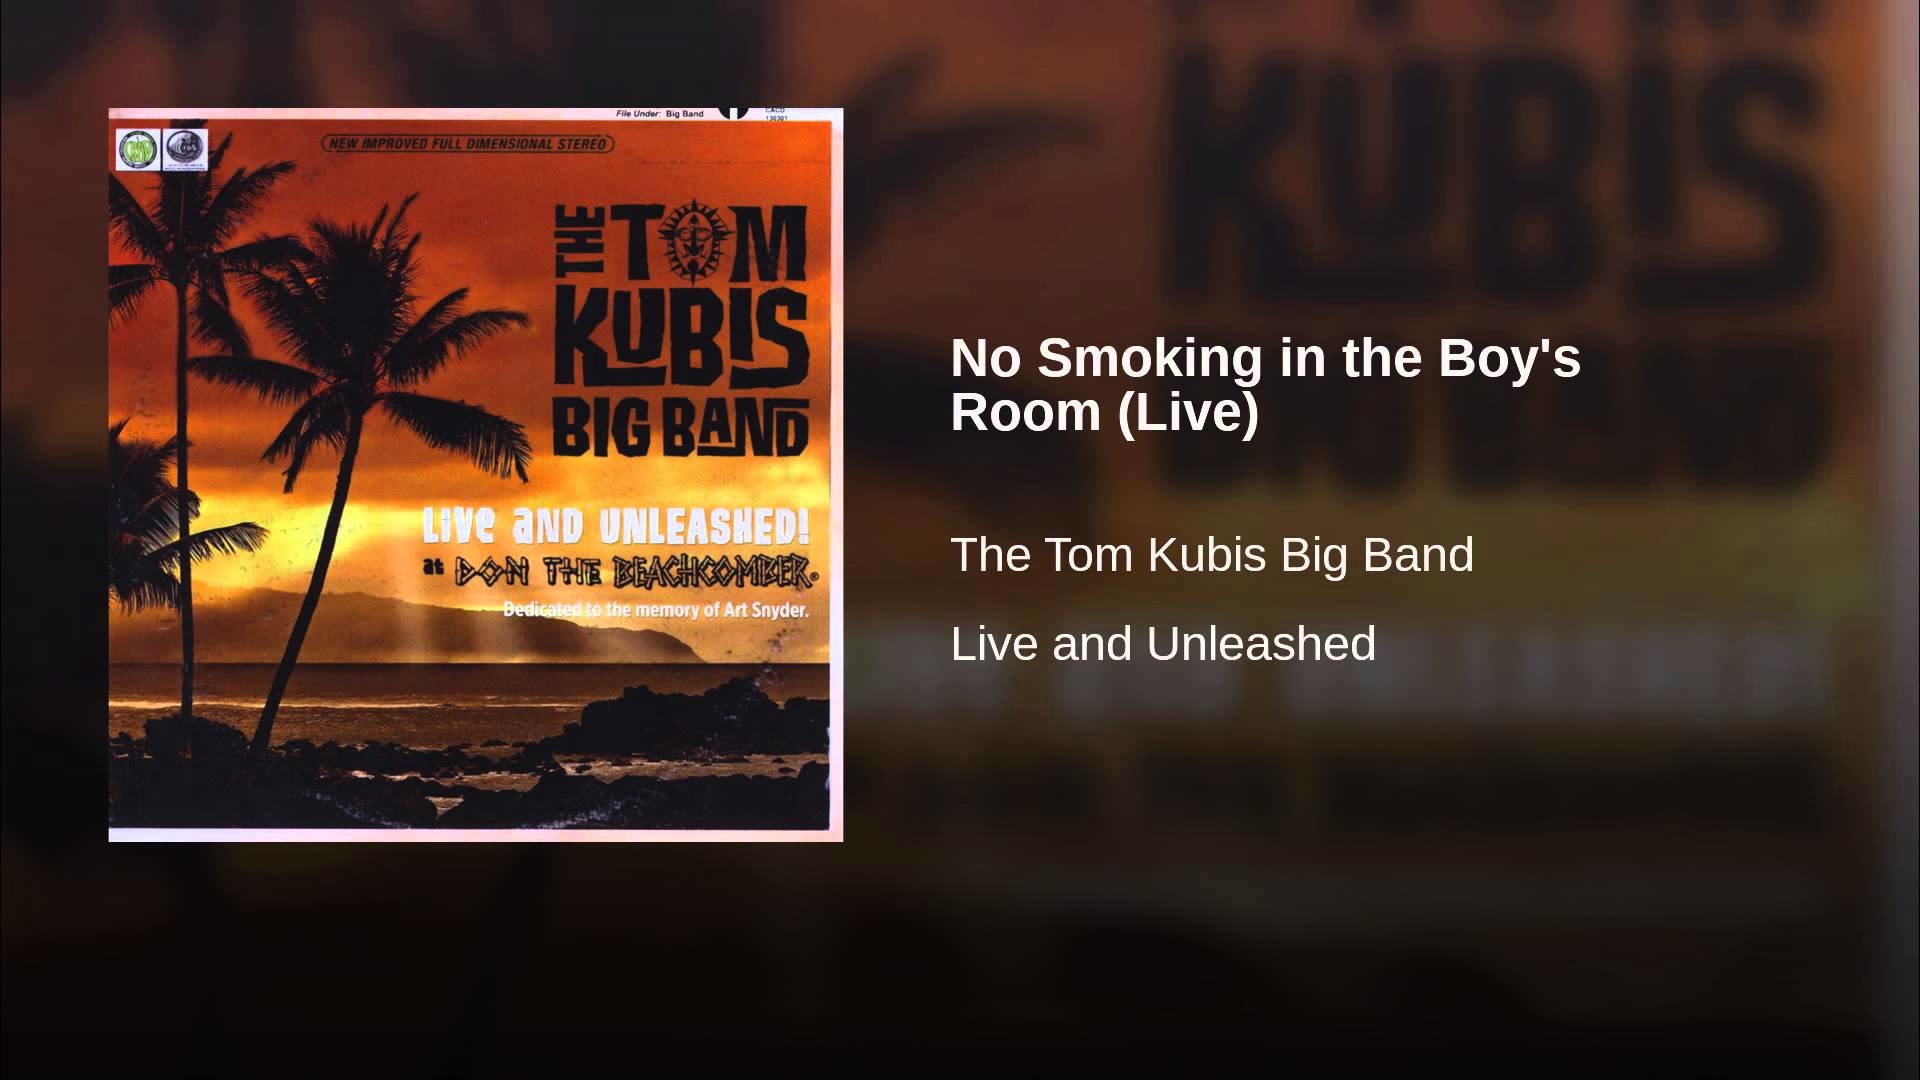 1920x1080 No Smoking in the Boy's Room (Live)